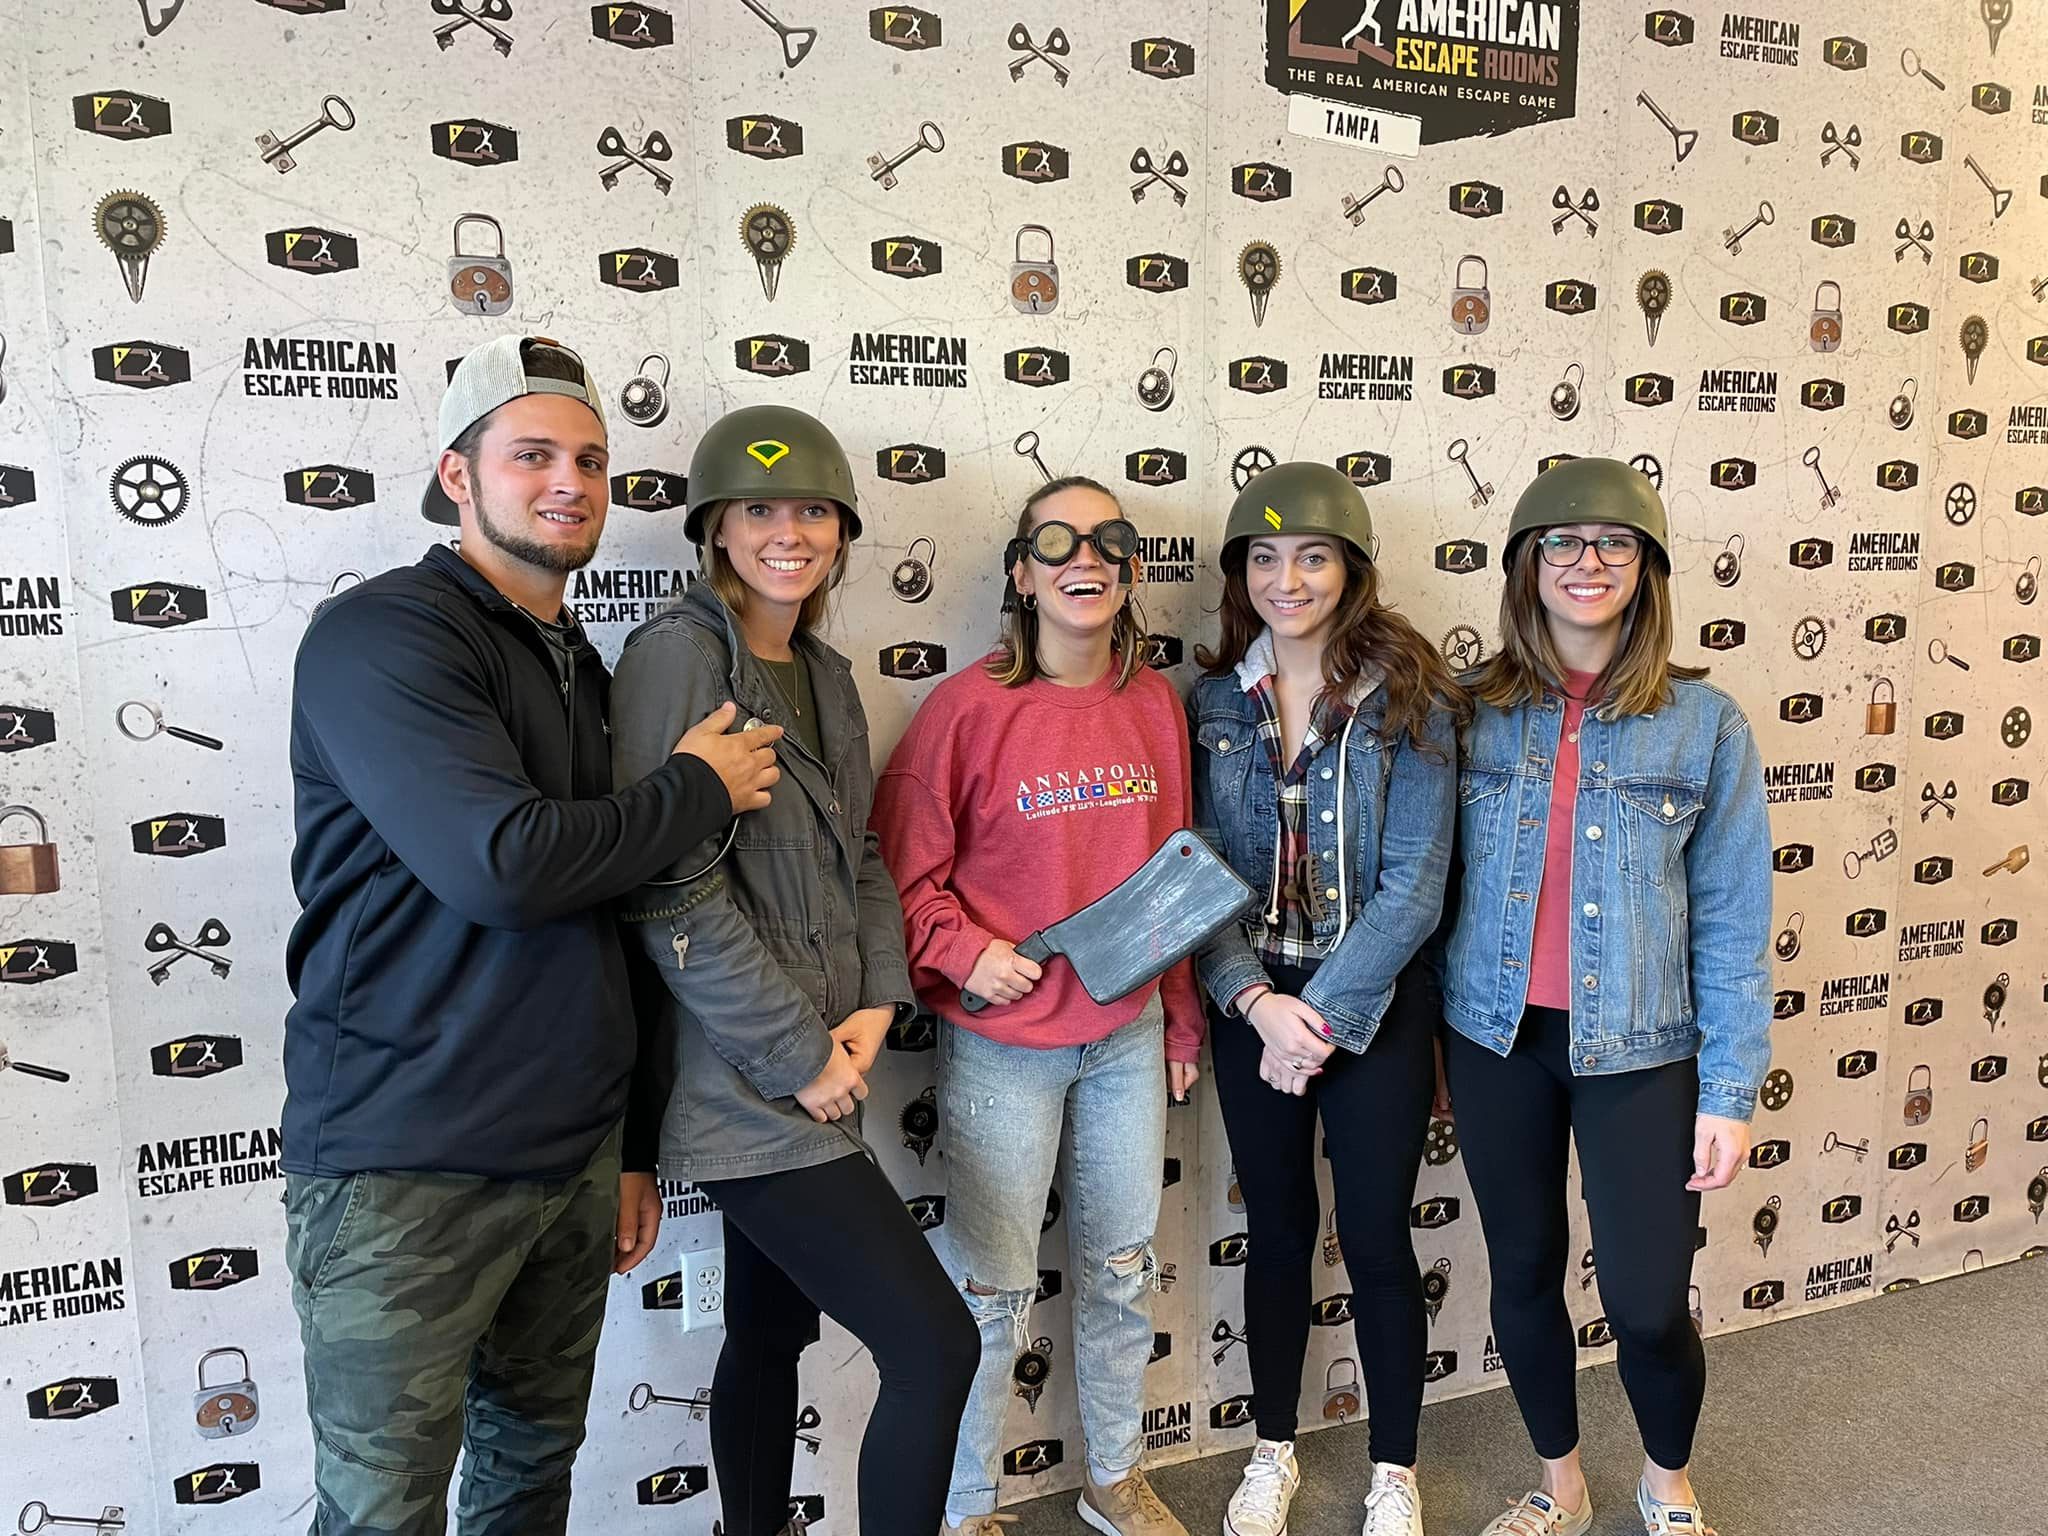 New York Visitors played the Mad Professor's Asylum - Tampa and finished the game with 10 minutes 18 seconds left. Congratulations! Well done!